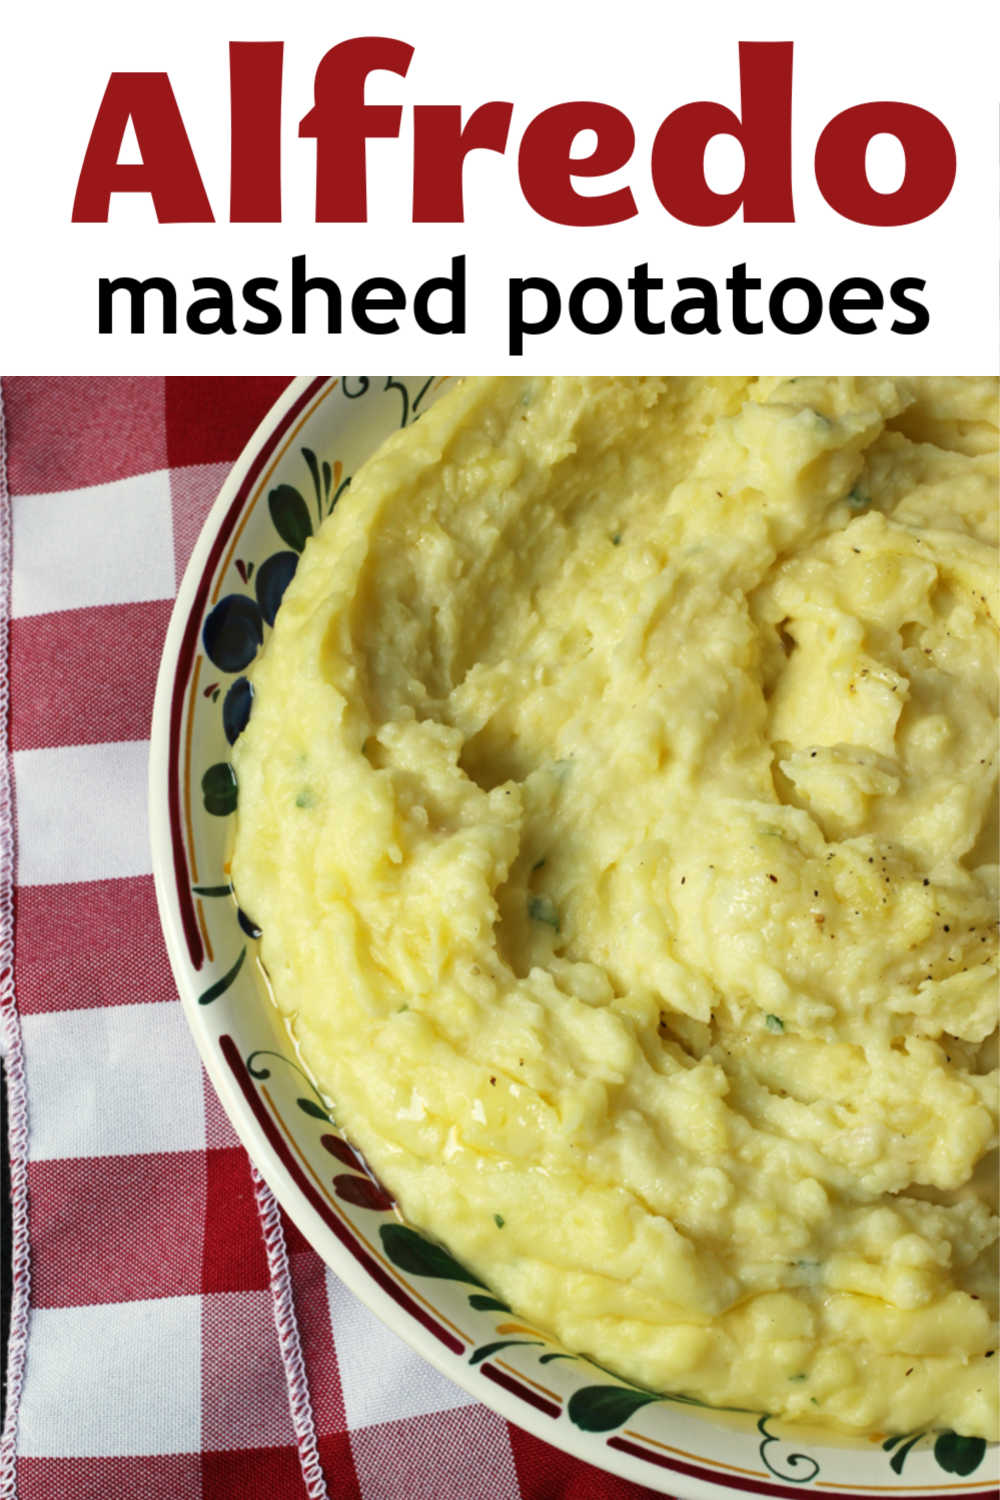 A close up of a bowl of Mashed potatoes